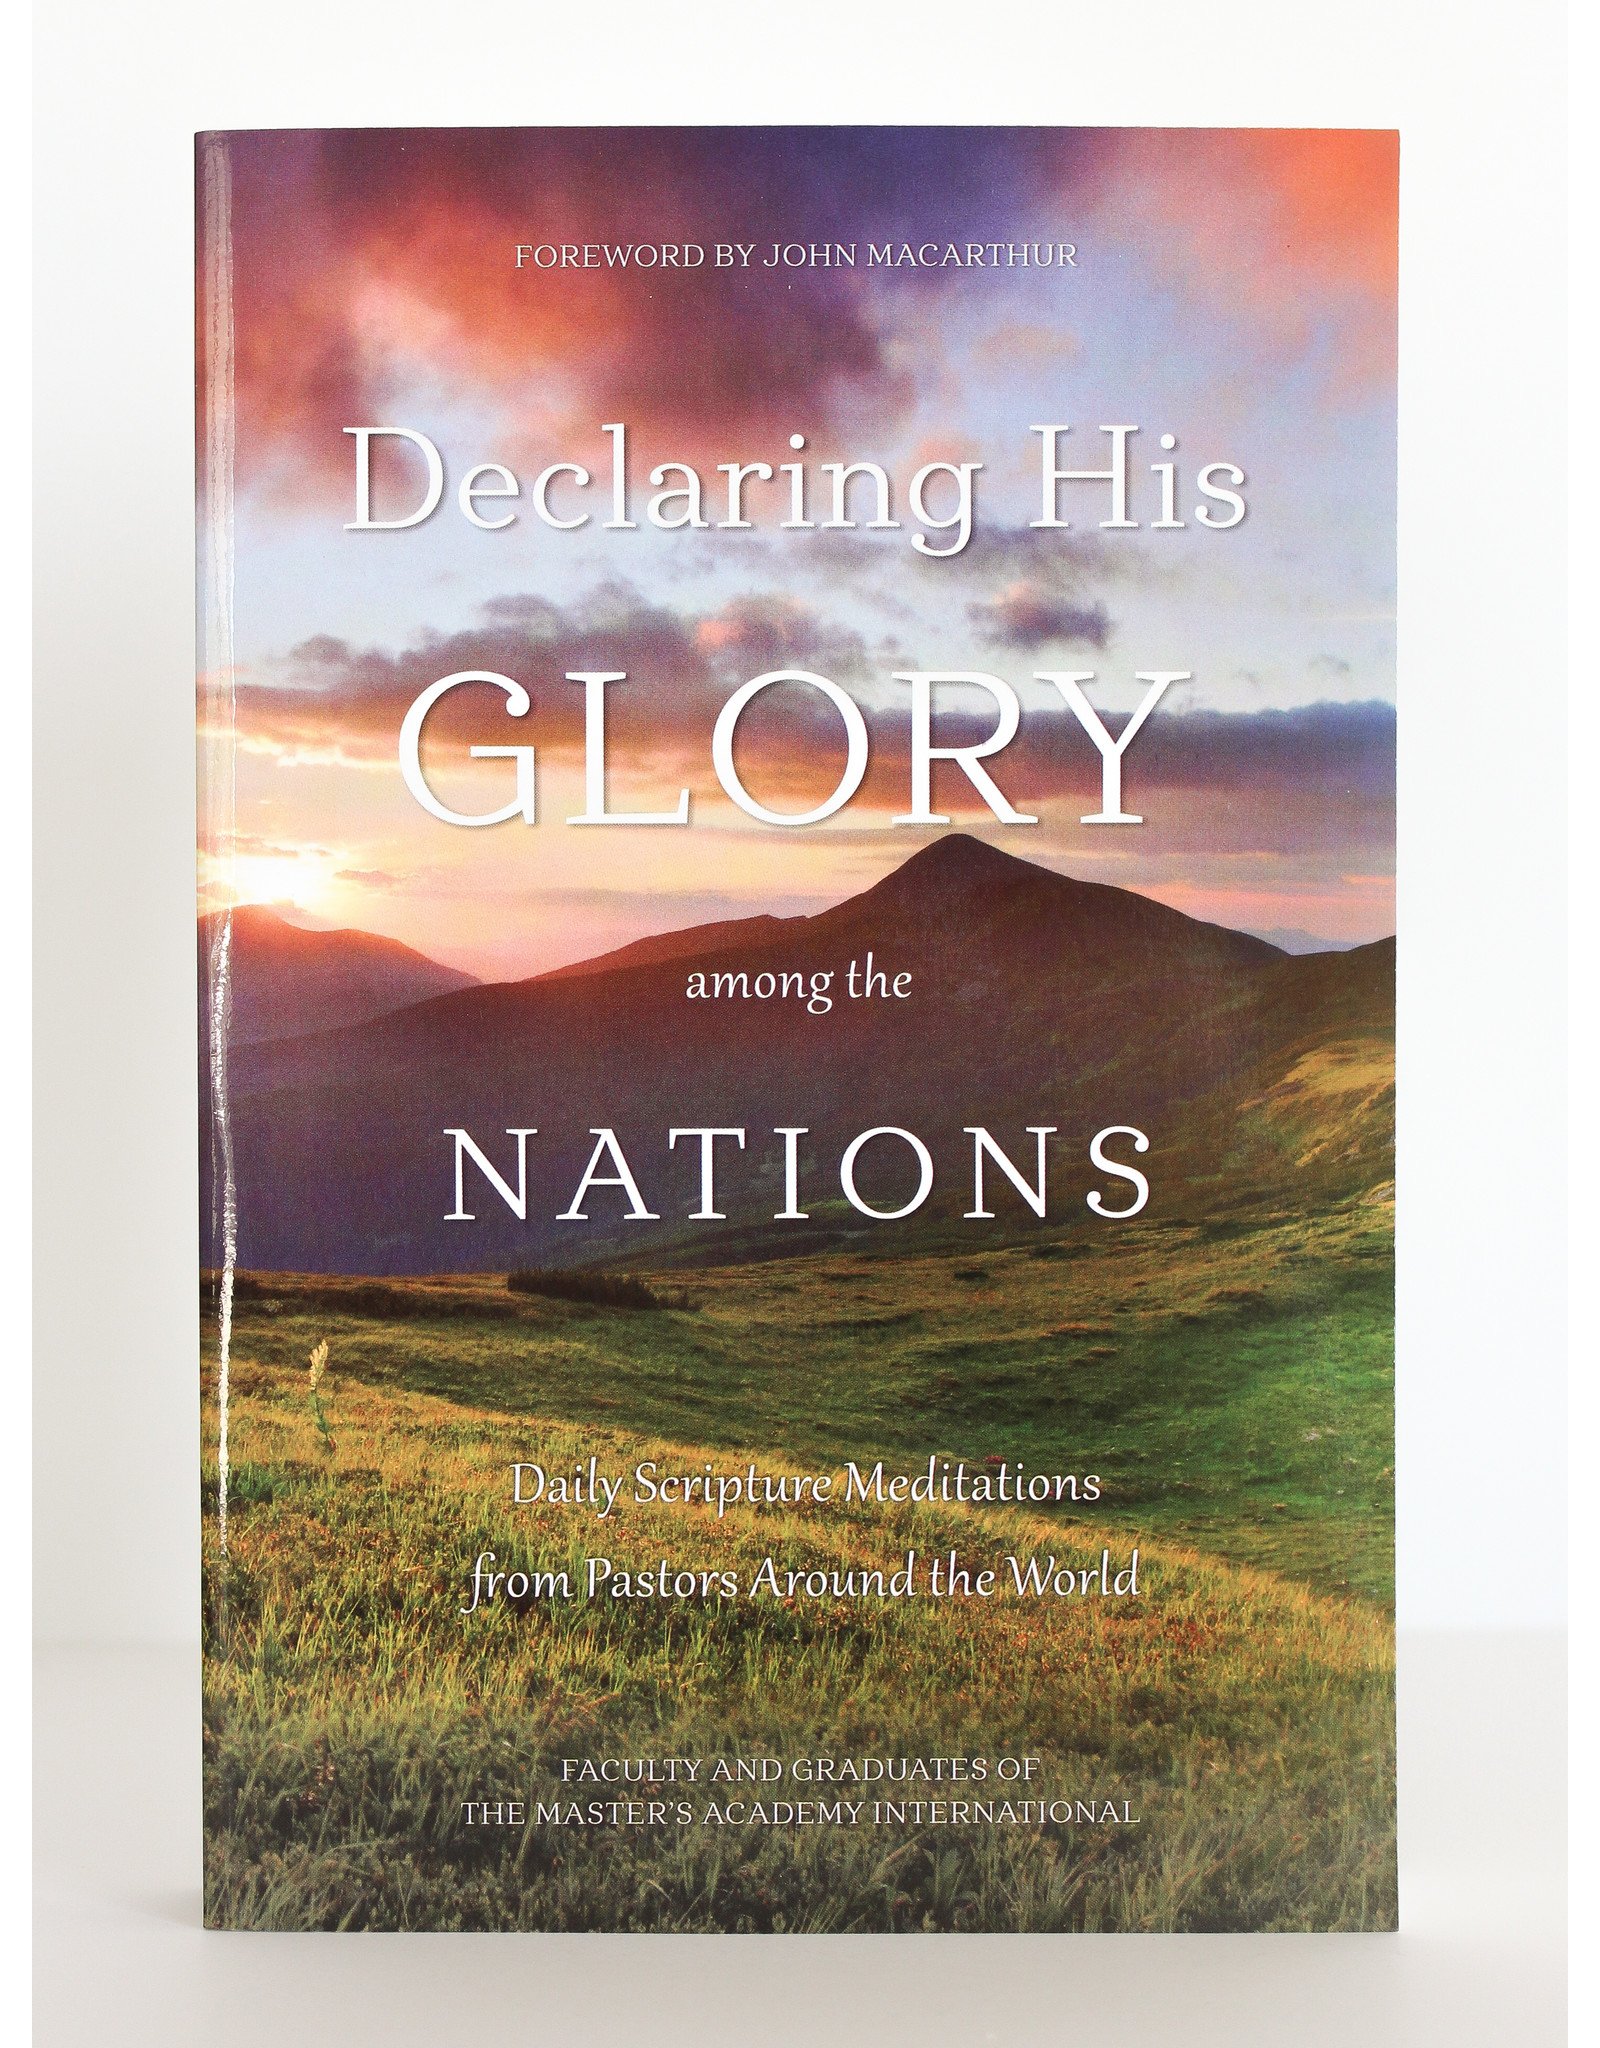 TMAI Declaring His Glory Among the Nations: Daily Scripture Meditations from Pastors Around the World